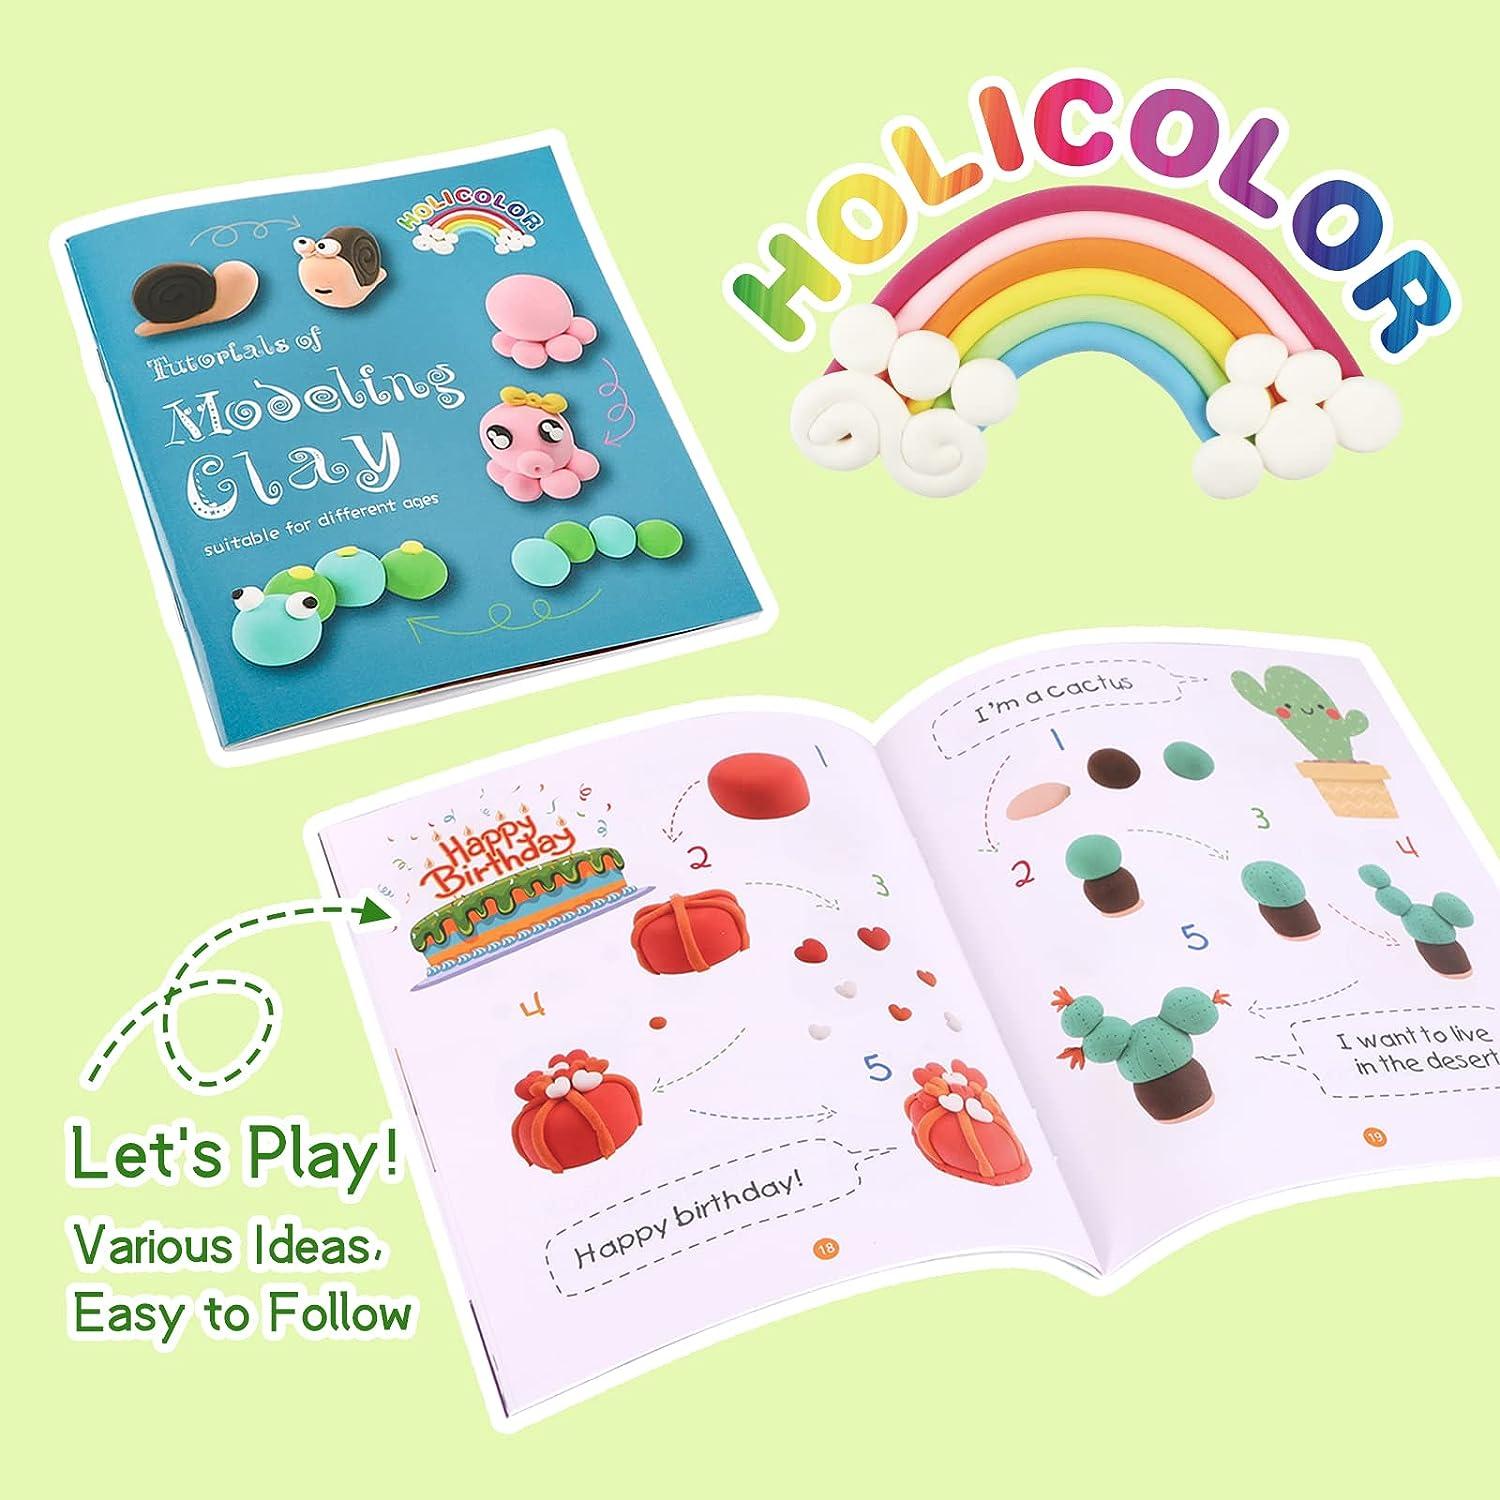 holicolor HOLICOLOR 52 Colors Air Dry Clay Magic Clay for Kids